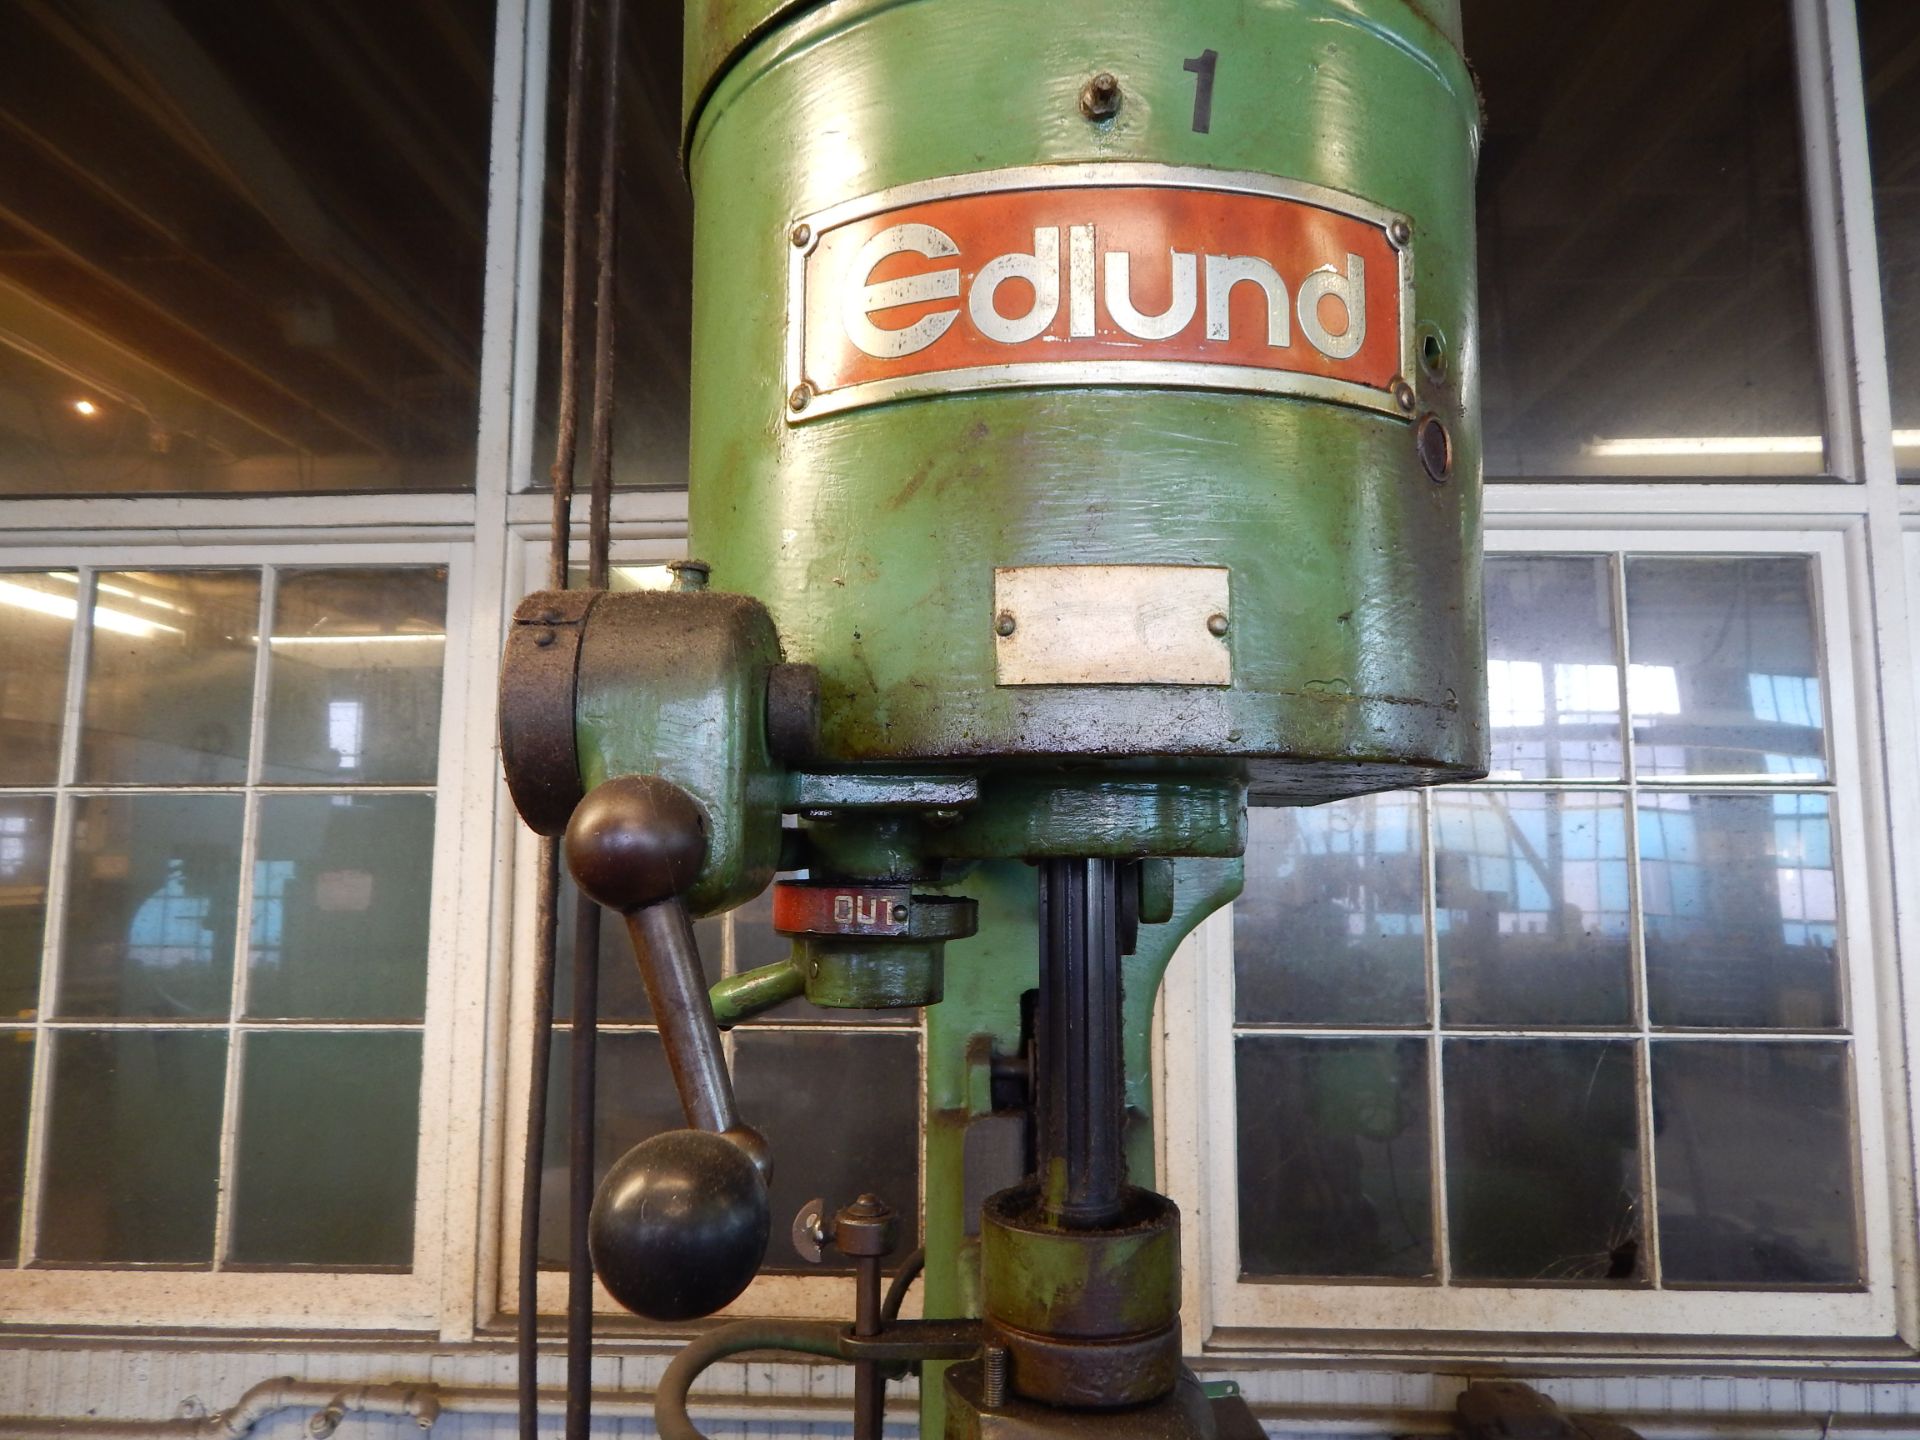 Edlund Model 2F-15 Single Spindle Drill Press, 15", s/n 66431 - Image 7 of 11